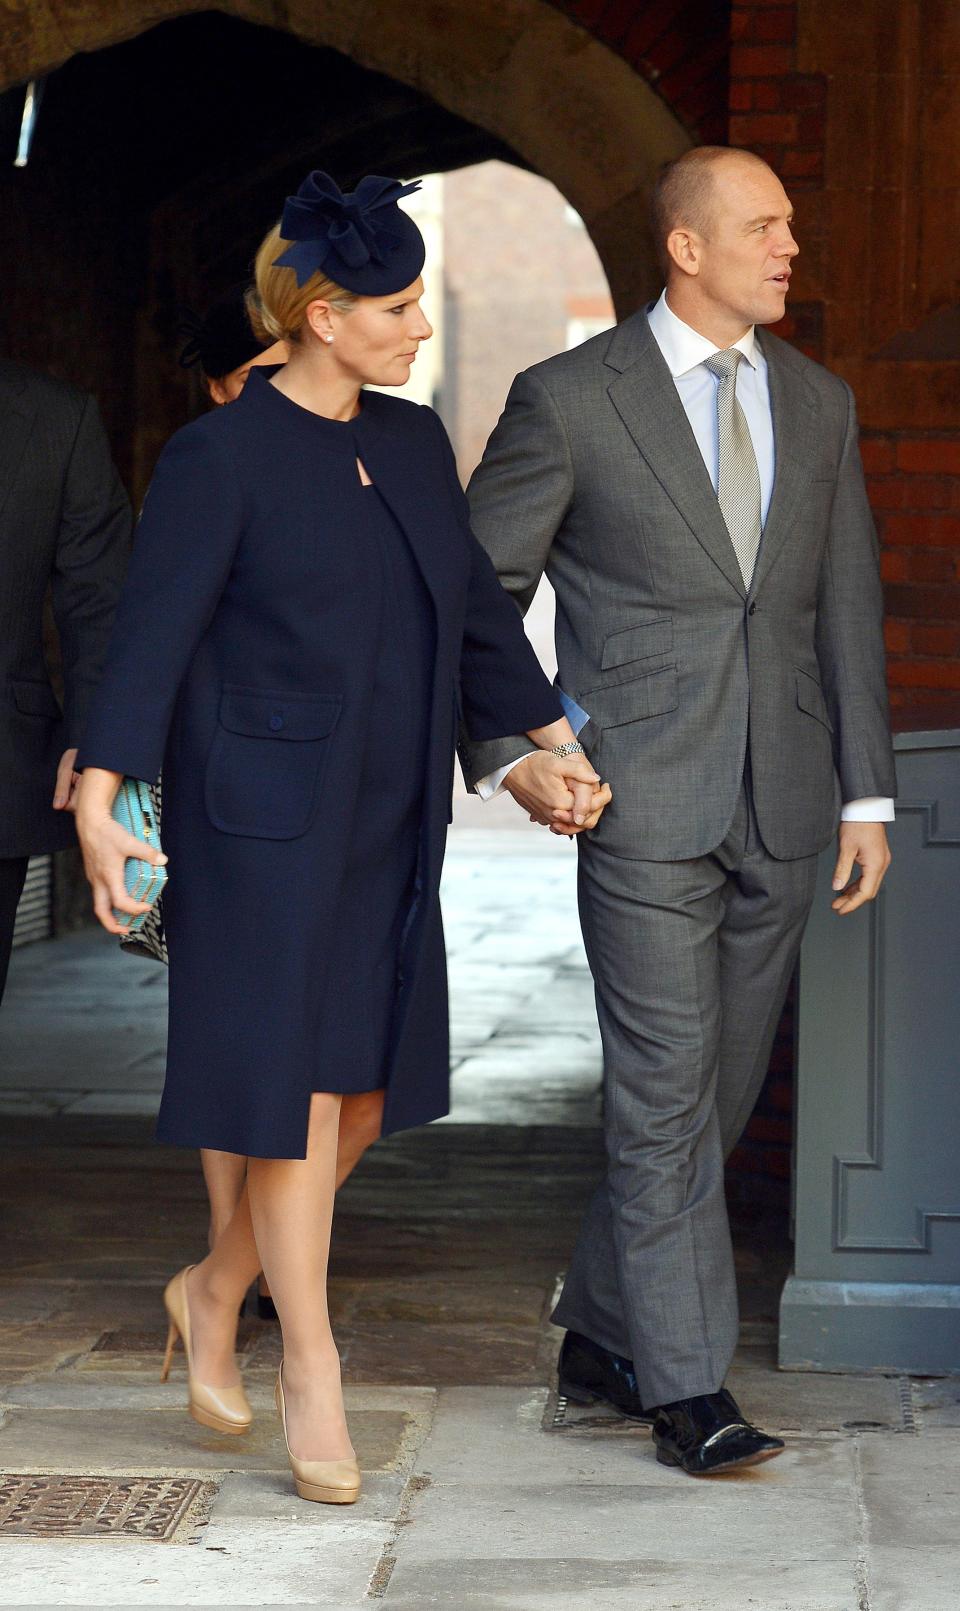 Zara Phillips and Mike Tindall at Prince George's christening in 2013.